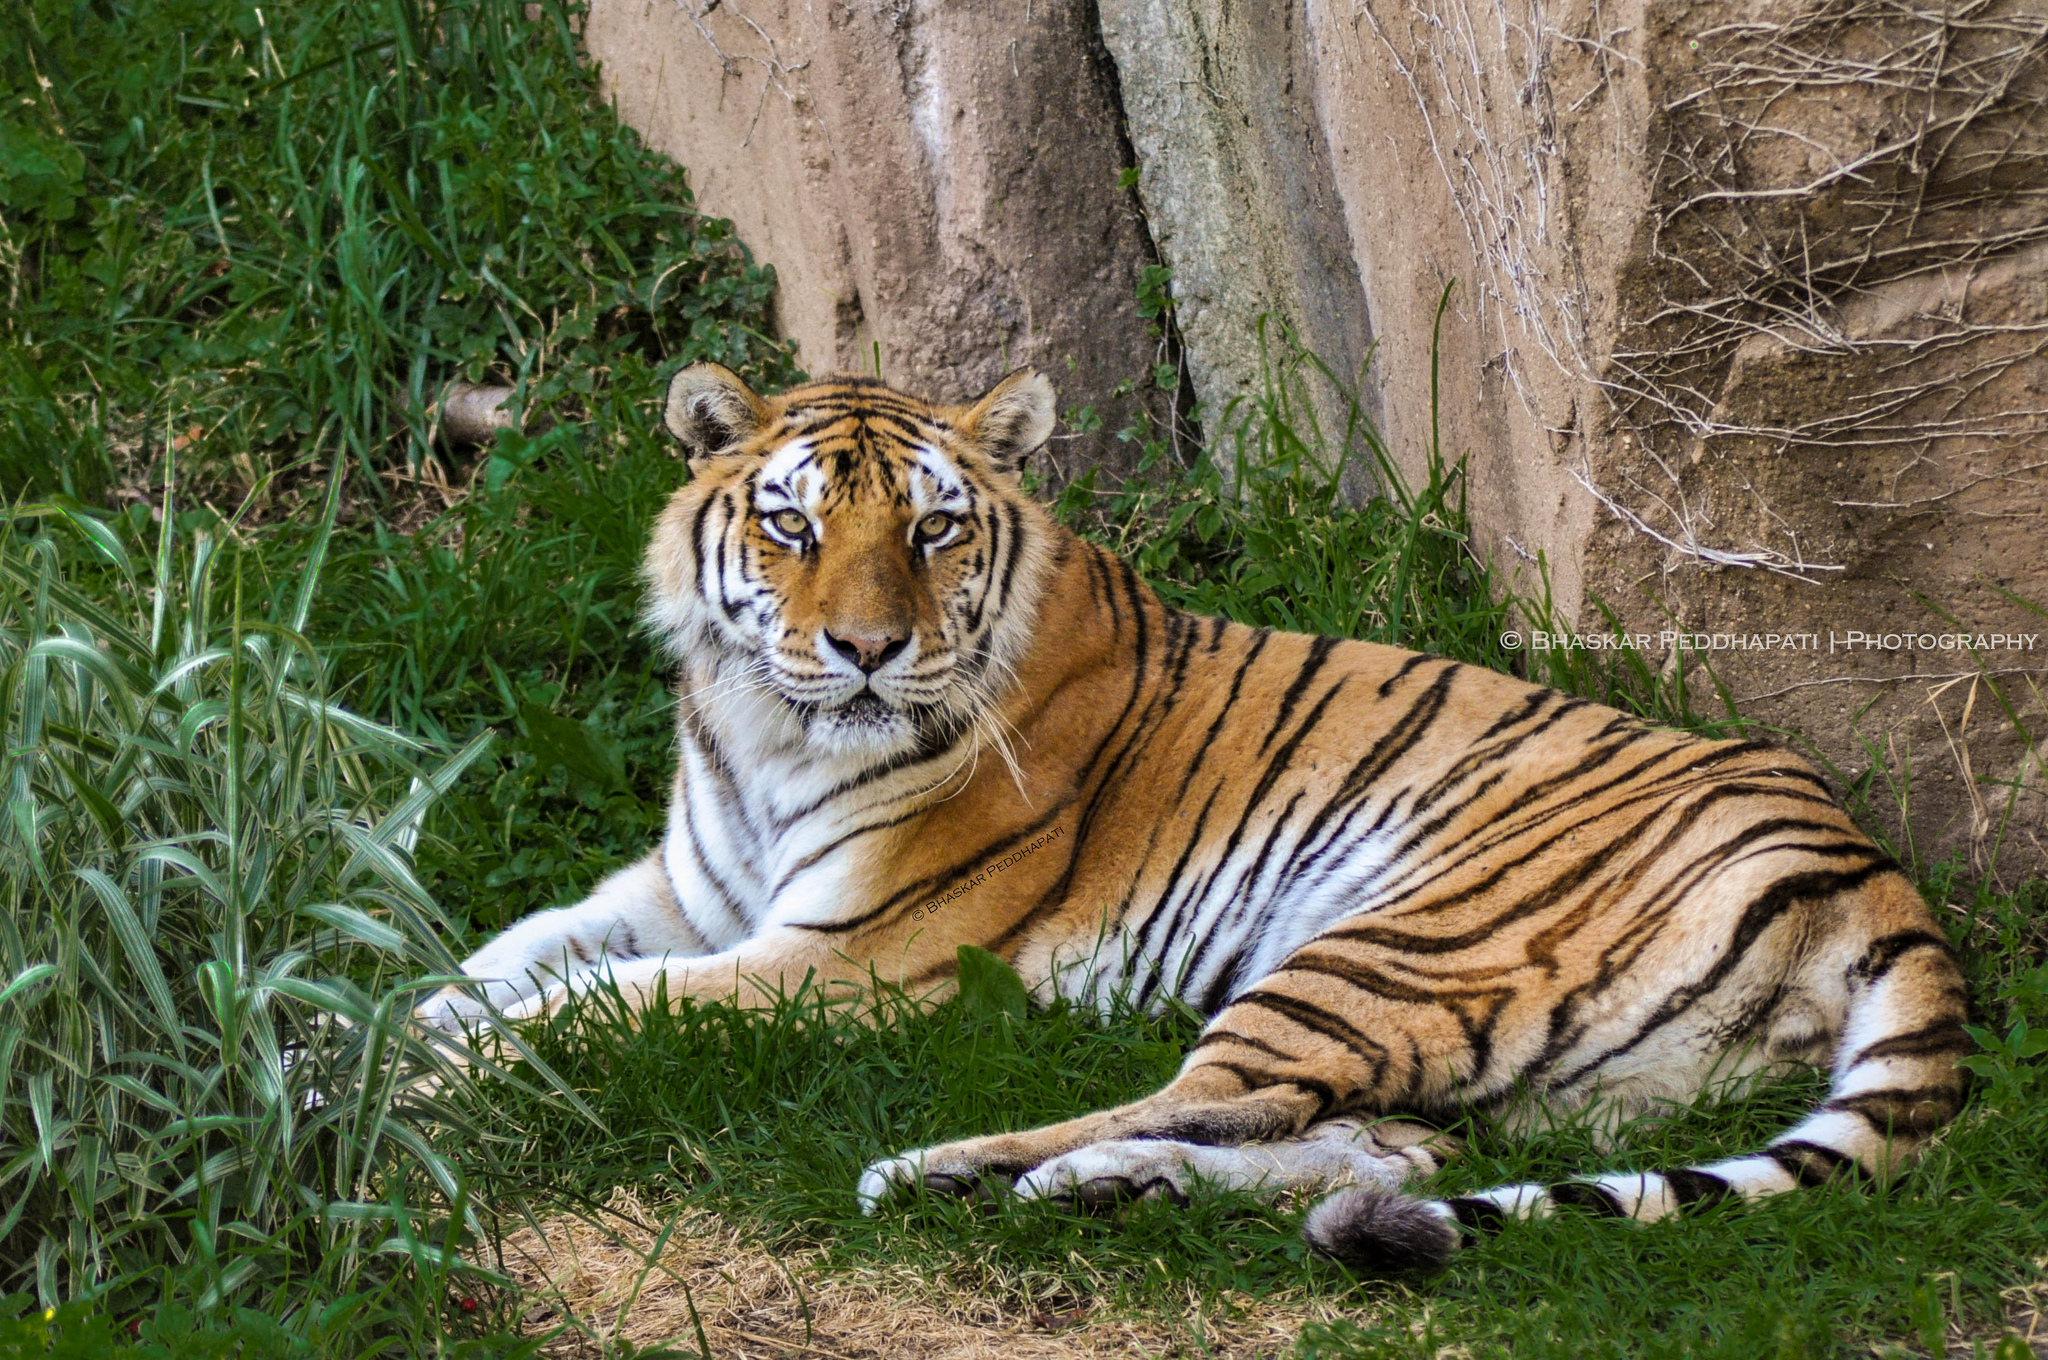 This tiger is one of the best attractions to see in Chicago ... photo by CC user peddhapati on Flickr